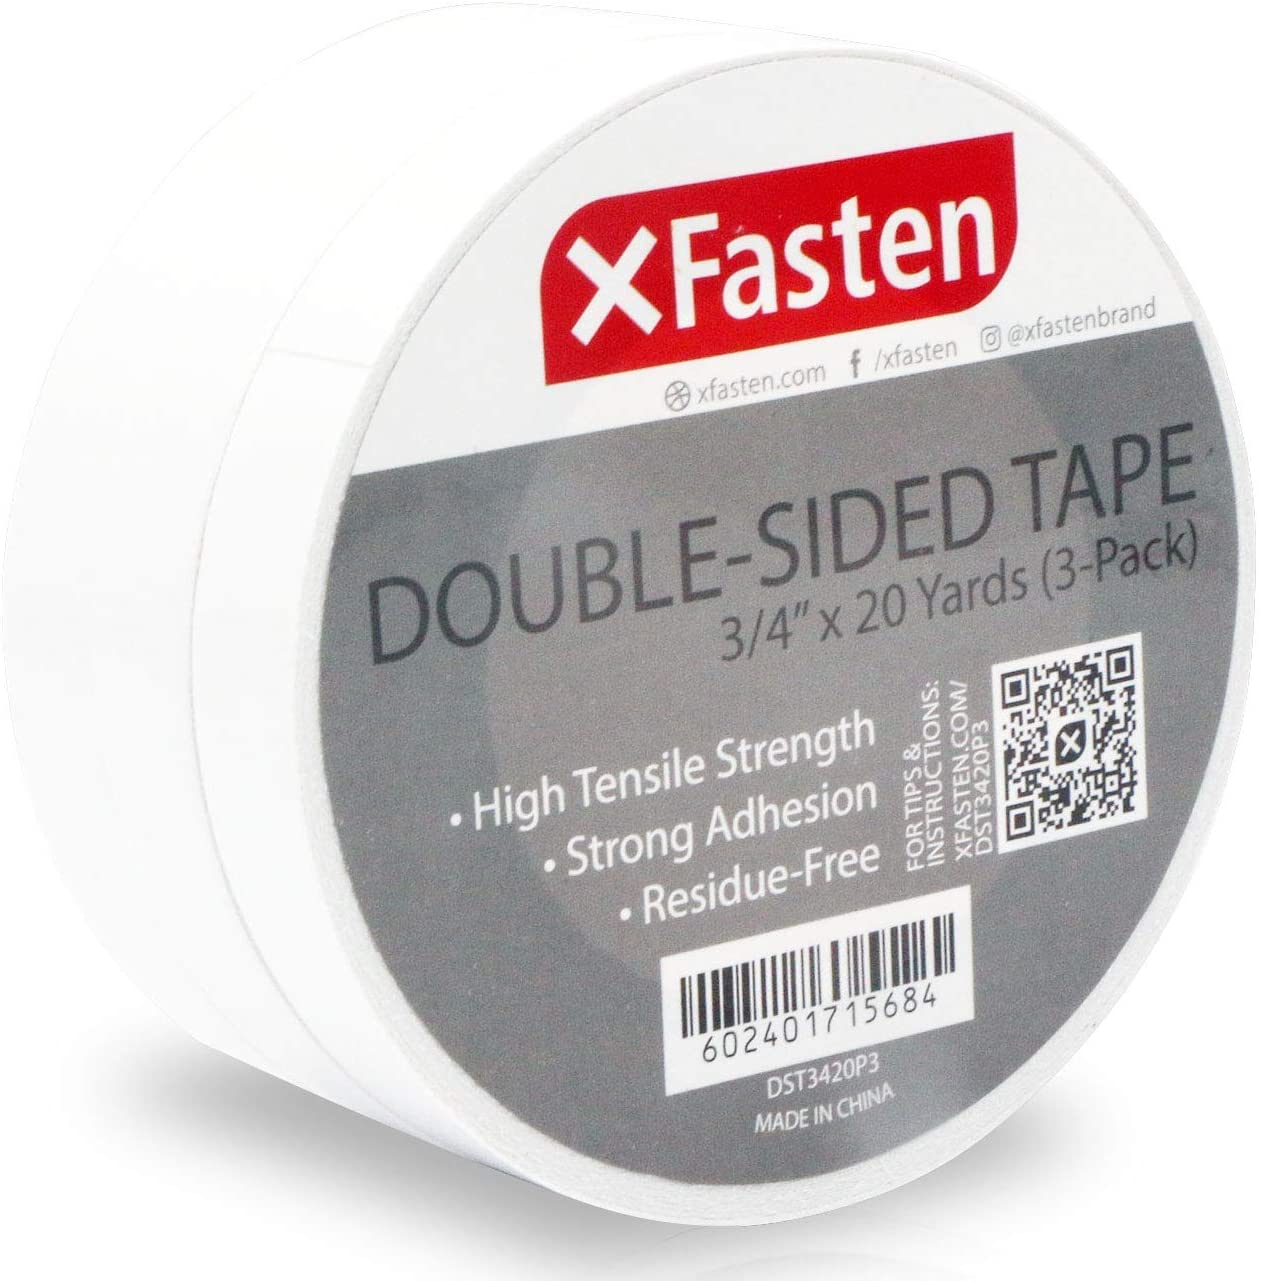 Image of xfasten double-sided tape.